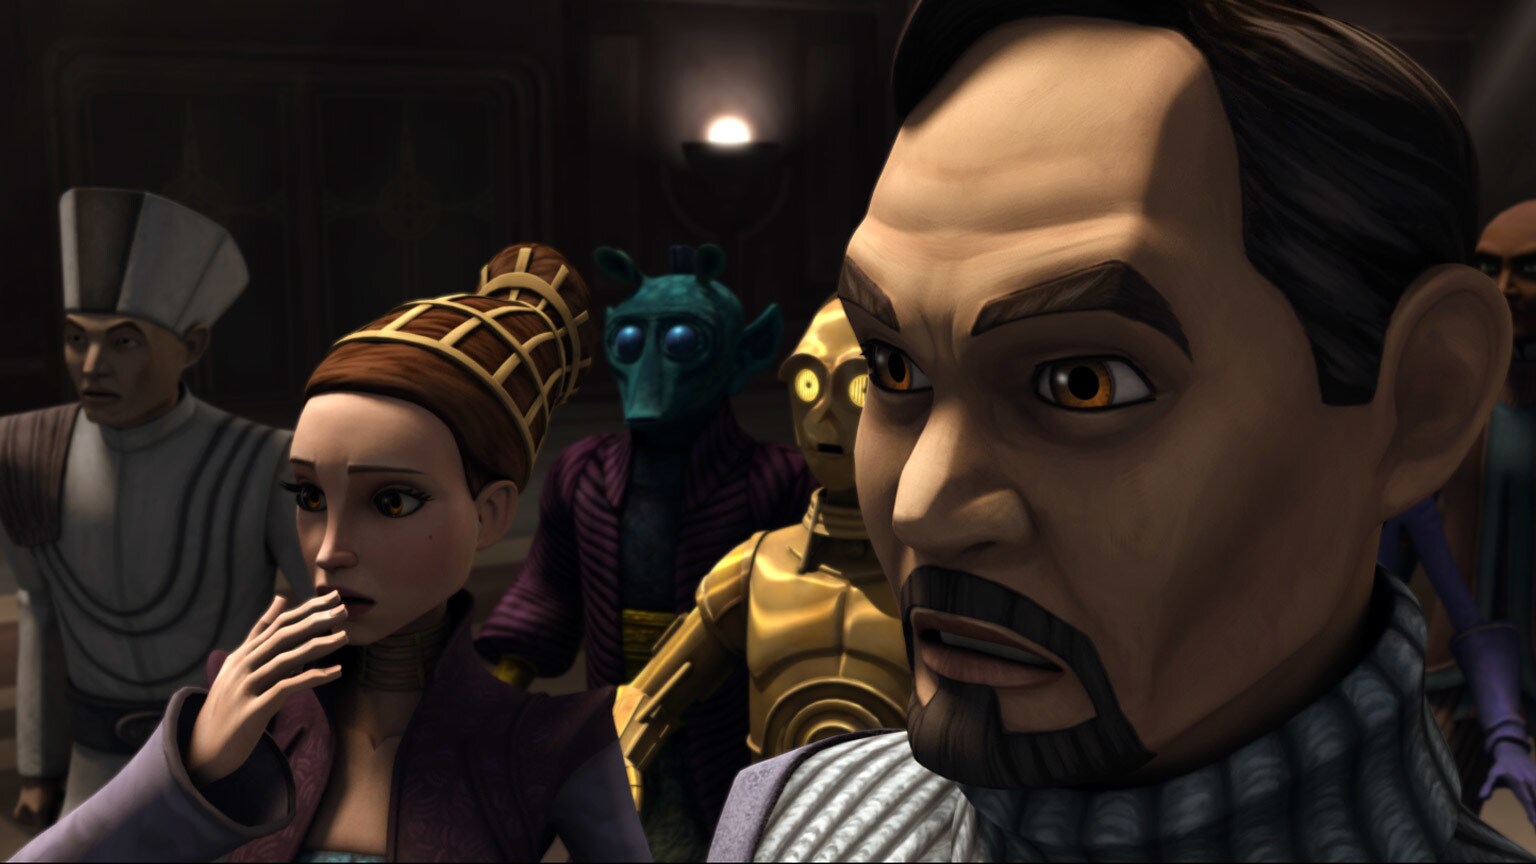 The Clone Wars Rewatch: A "Hostage Crisis" at the Senate